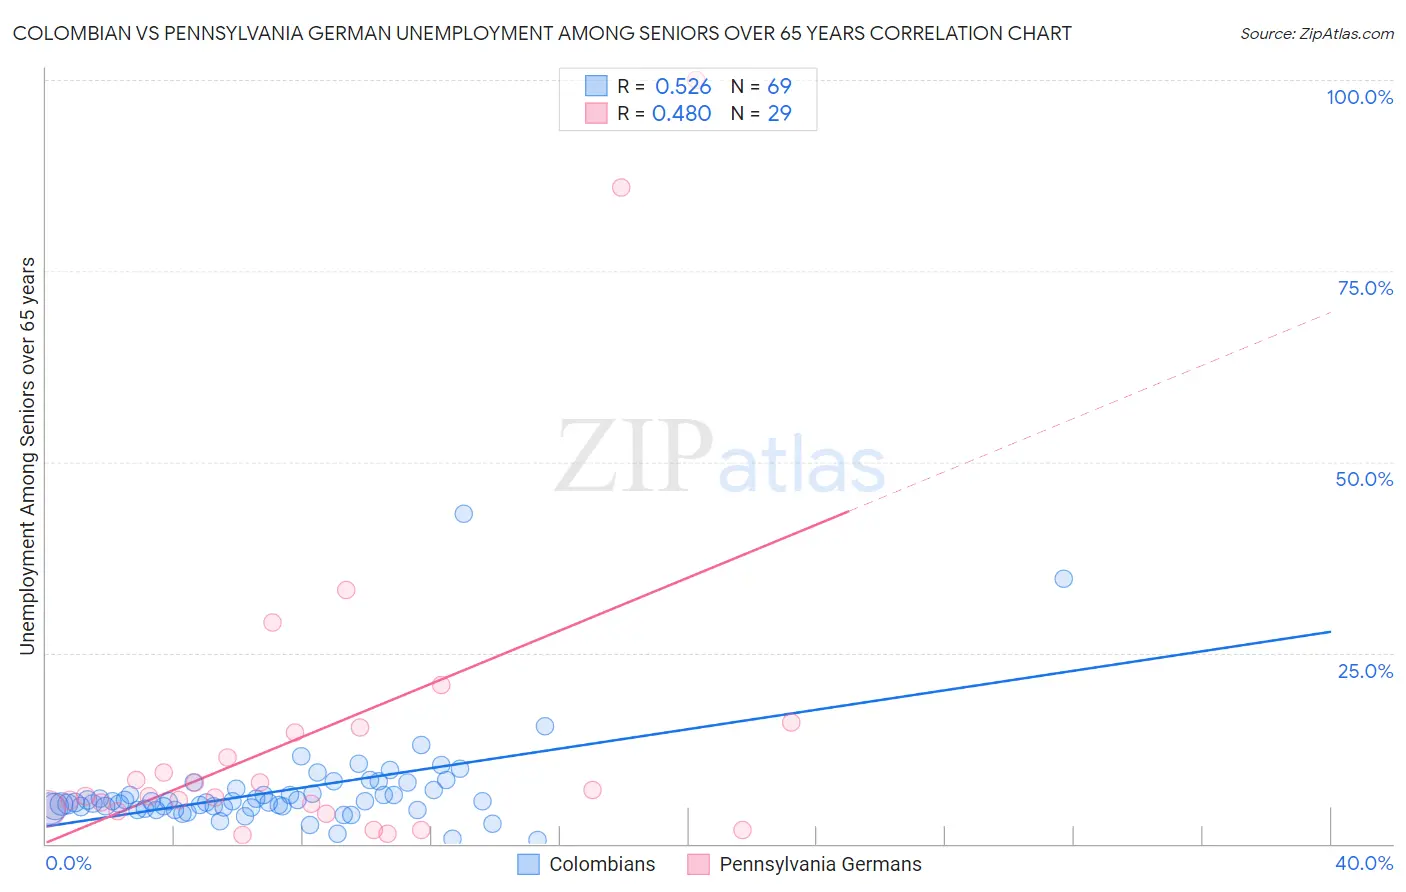 Colombian vs Pennsylvania German Unemployment Among Seniors over 65 years